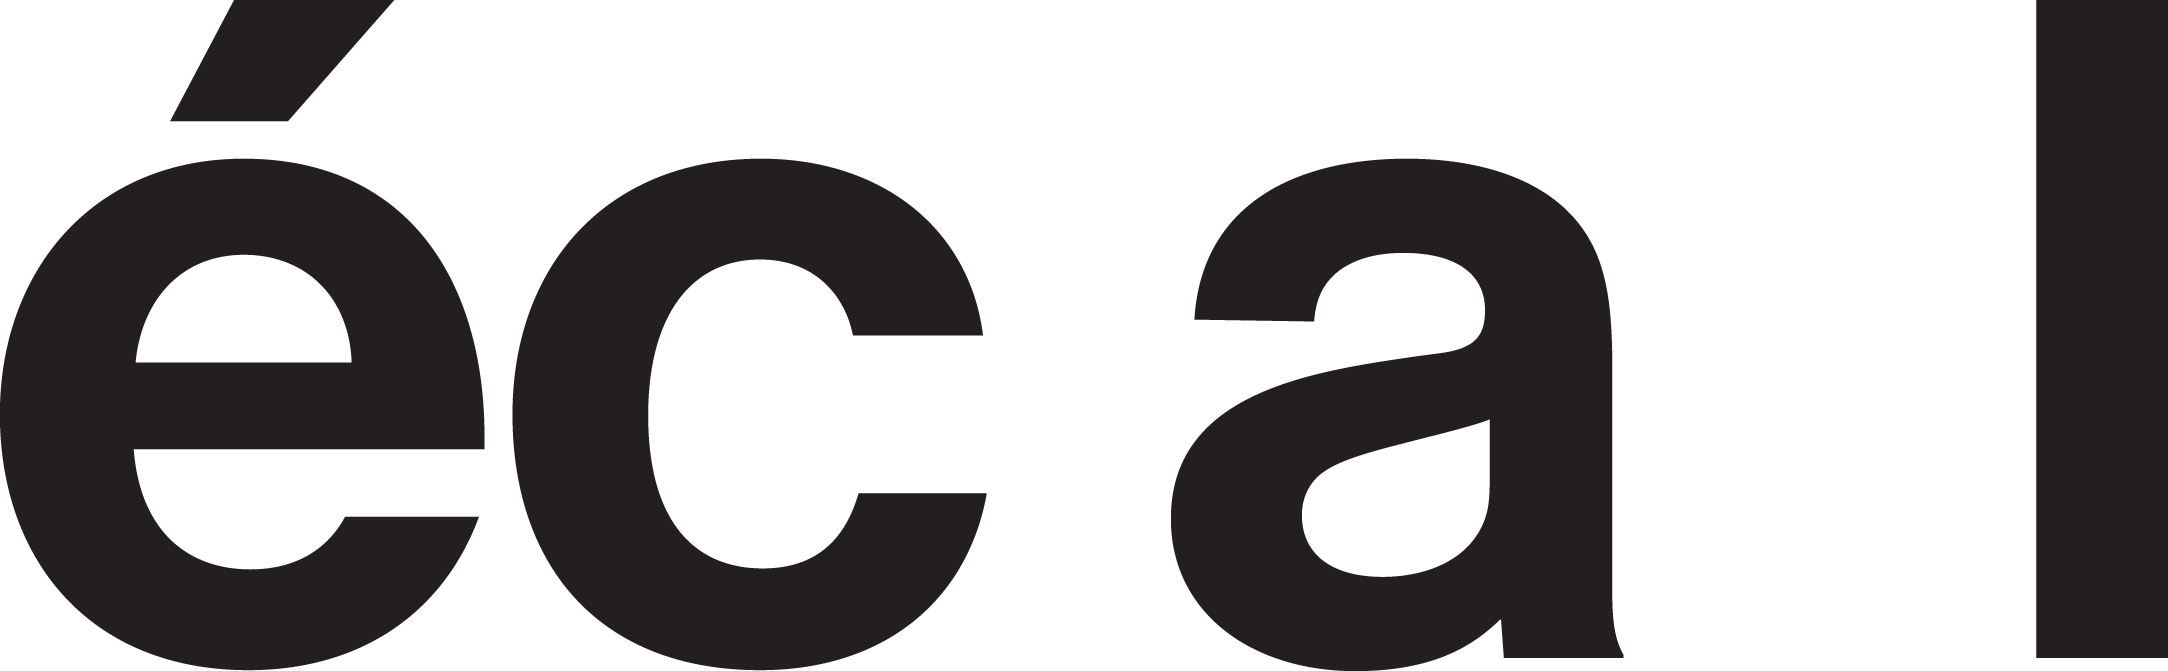 ECAL, Lausanne University of Art and Design